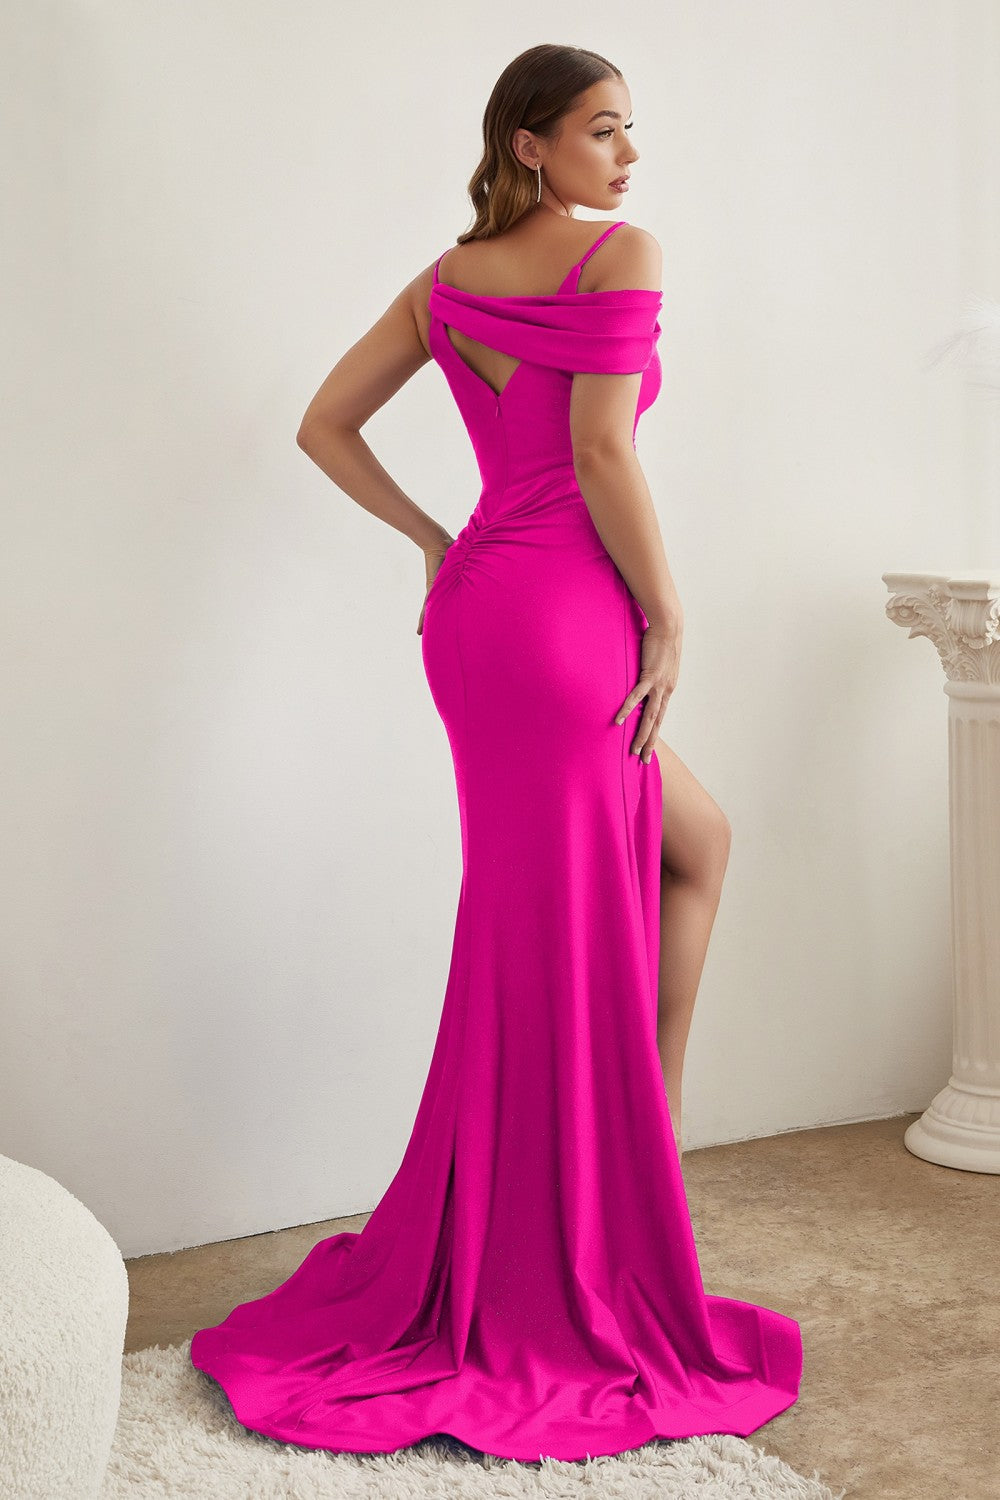 Fuchsia Asymmetrical Shoulder Satin Gown CD881 - Women Evening Formal Gown - Special Occasion-Curves